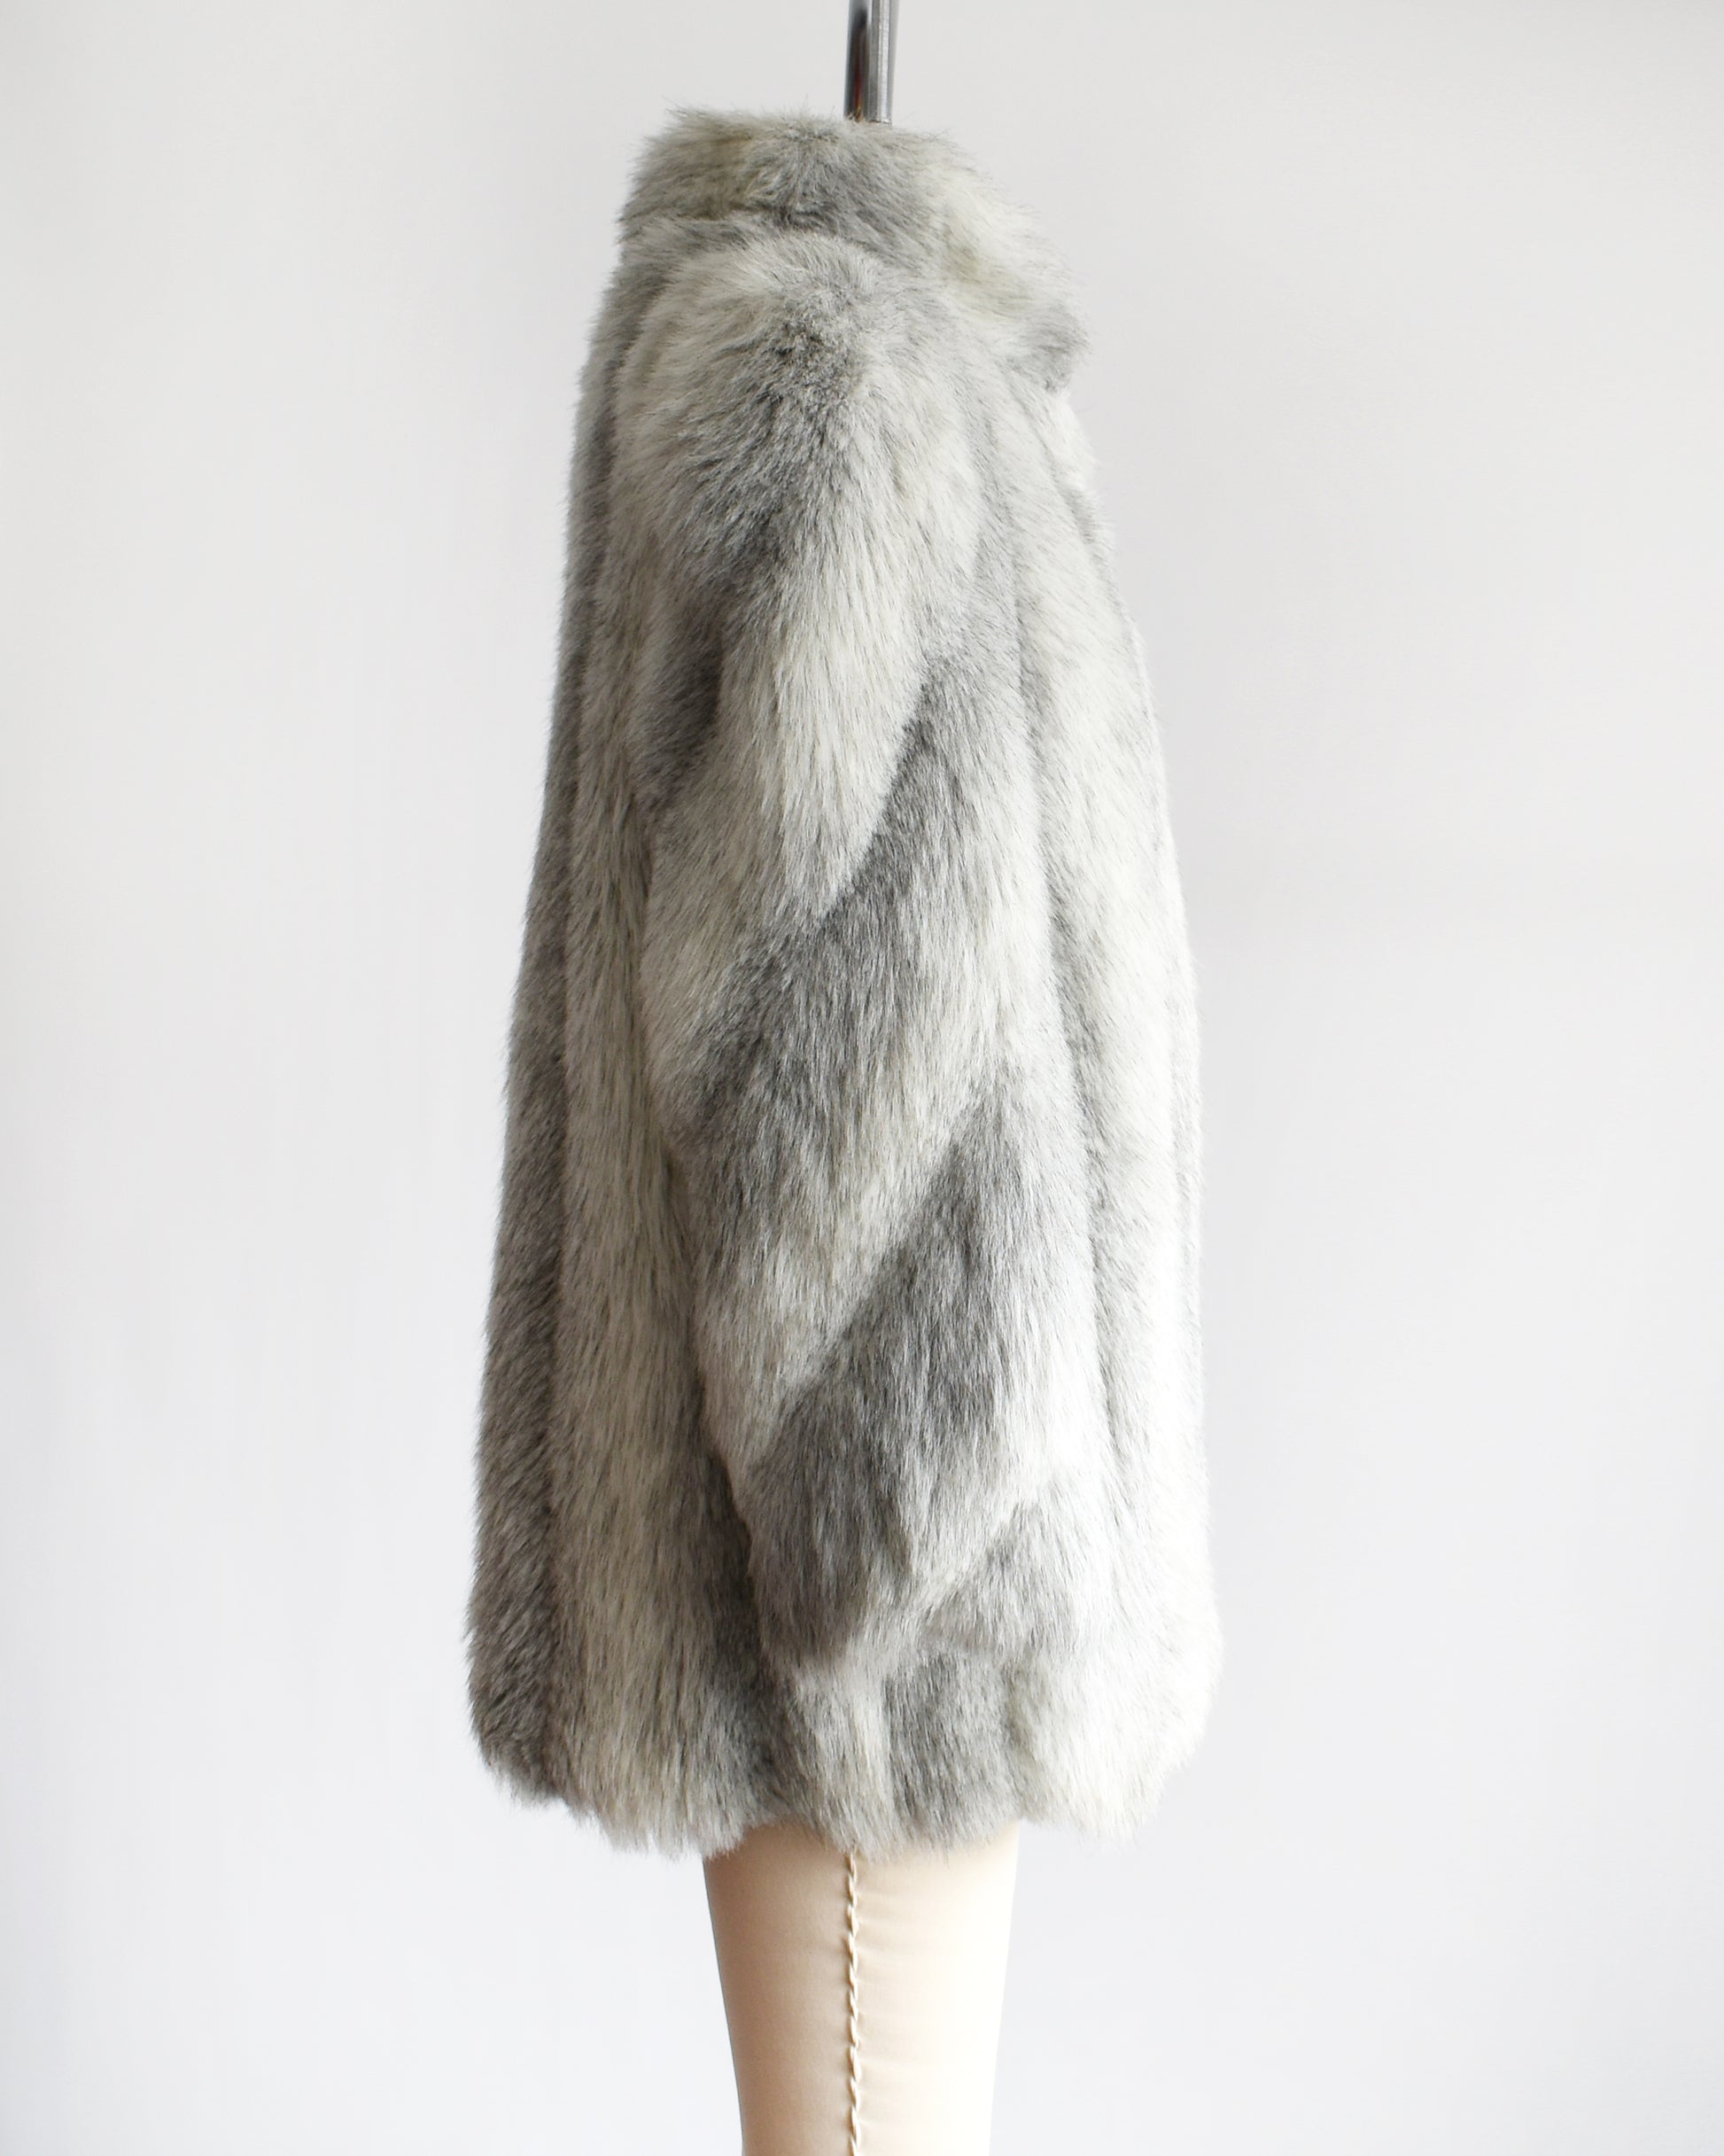 Side view of a vintage 1980s faux fur coat that features a plush white faux fur with light and dark gray stripes, a high collar, and structured puffed shoulders.